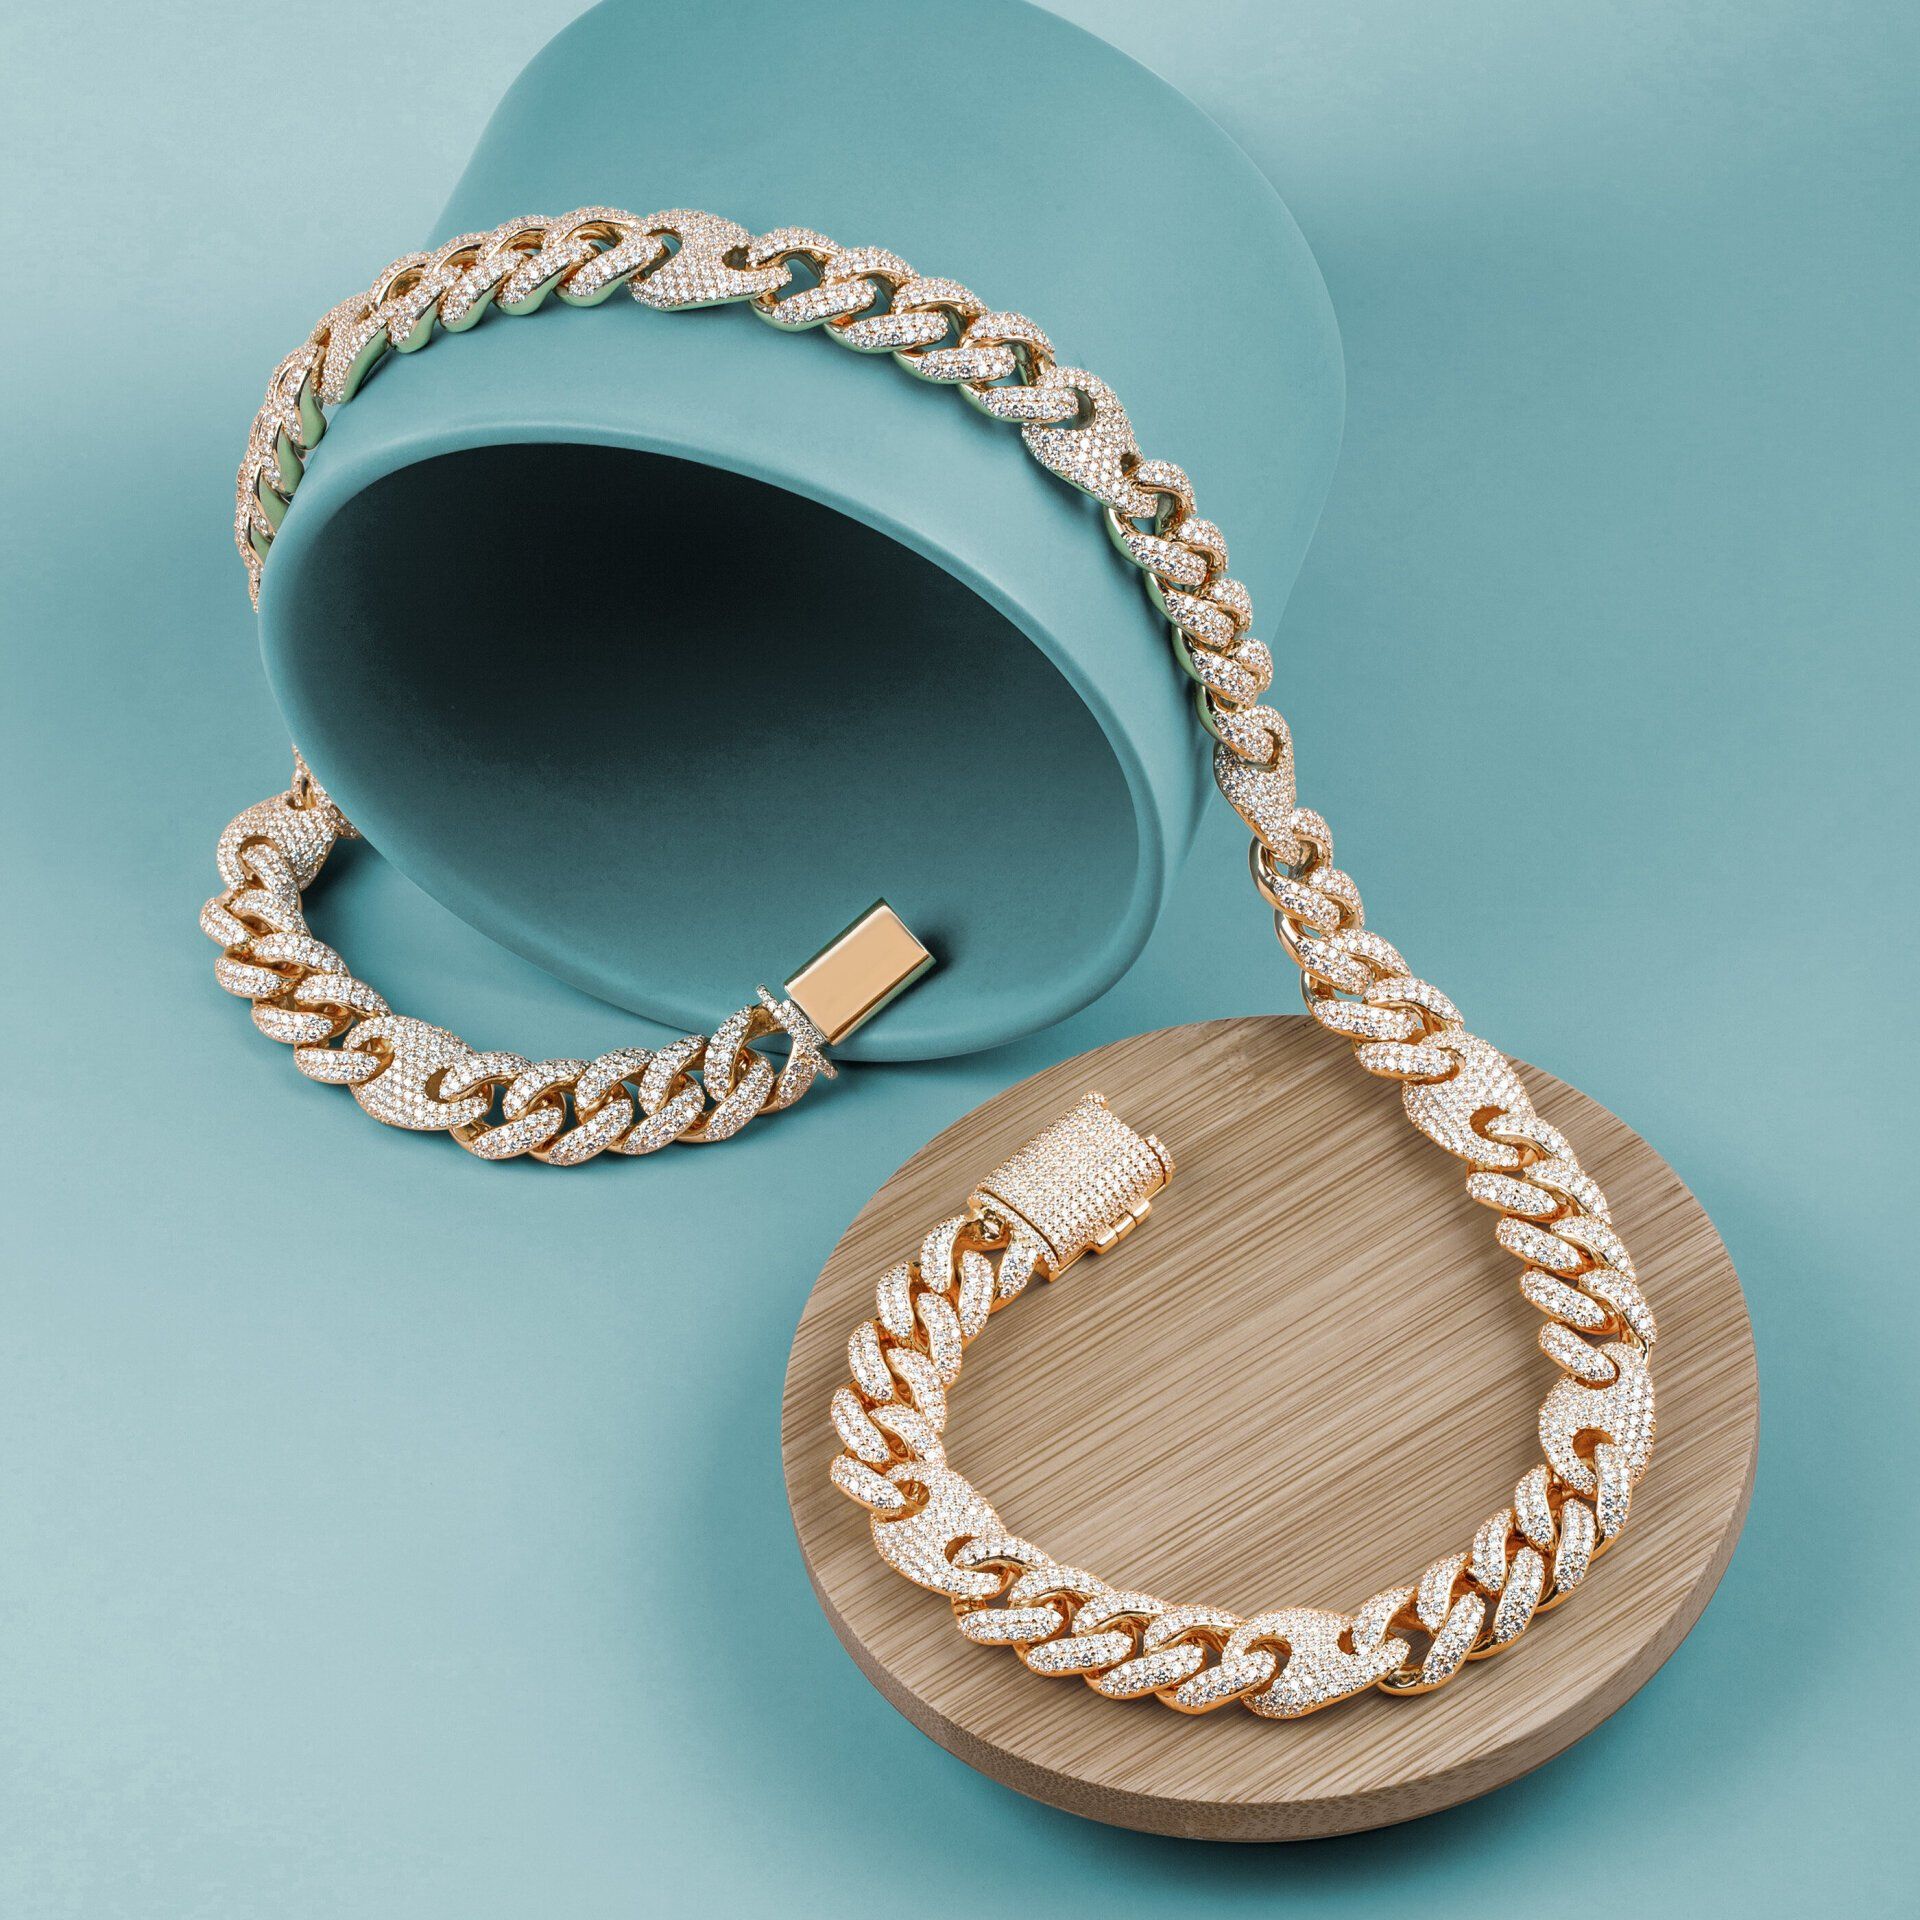 A necklace and bracelet are sitting on a wooden circle.